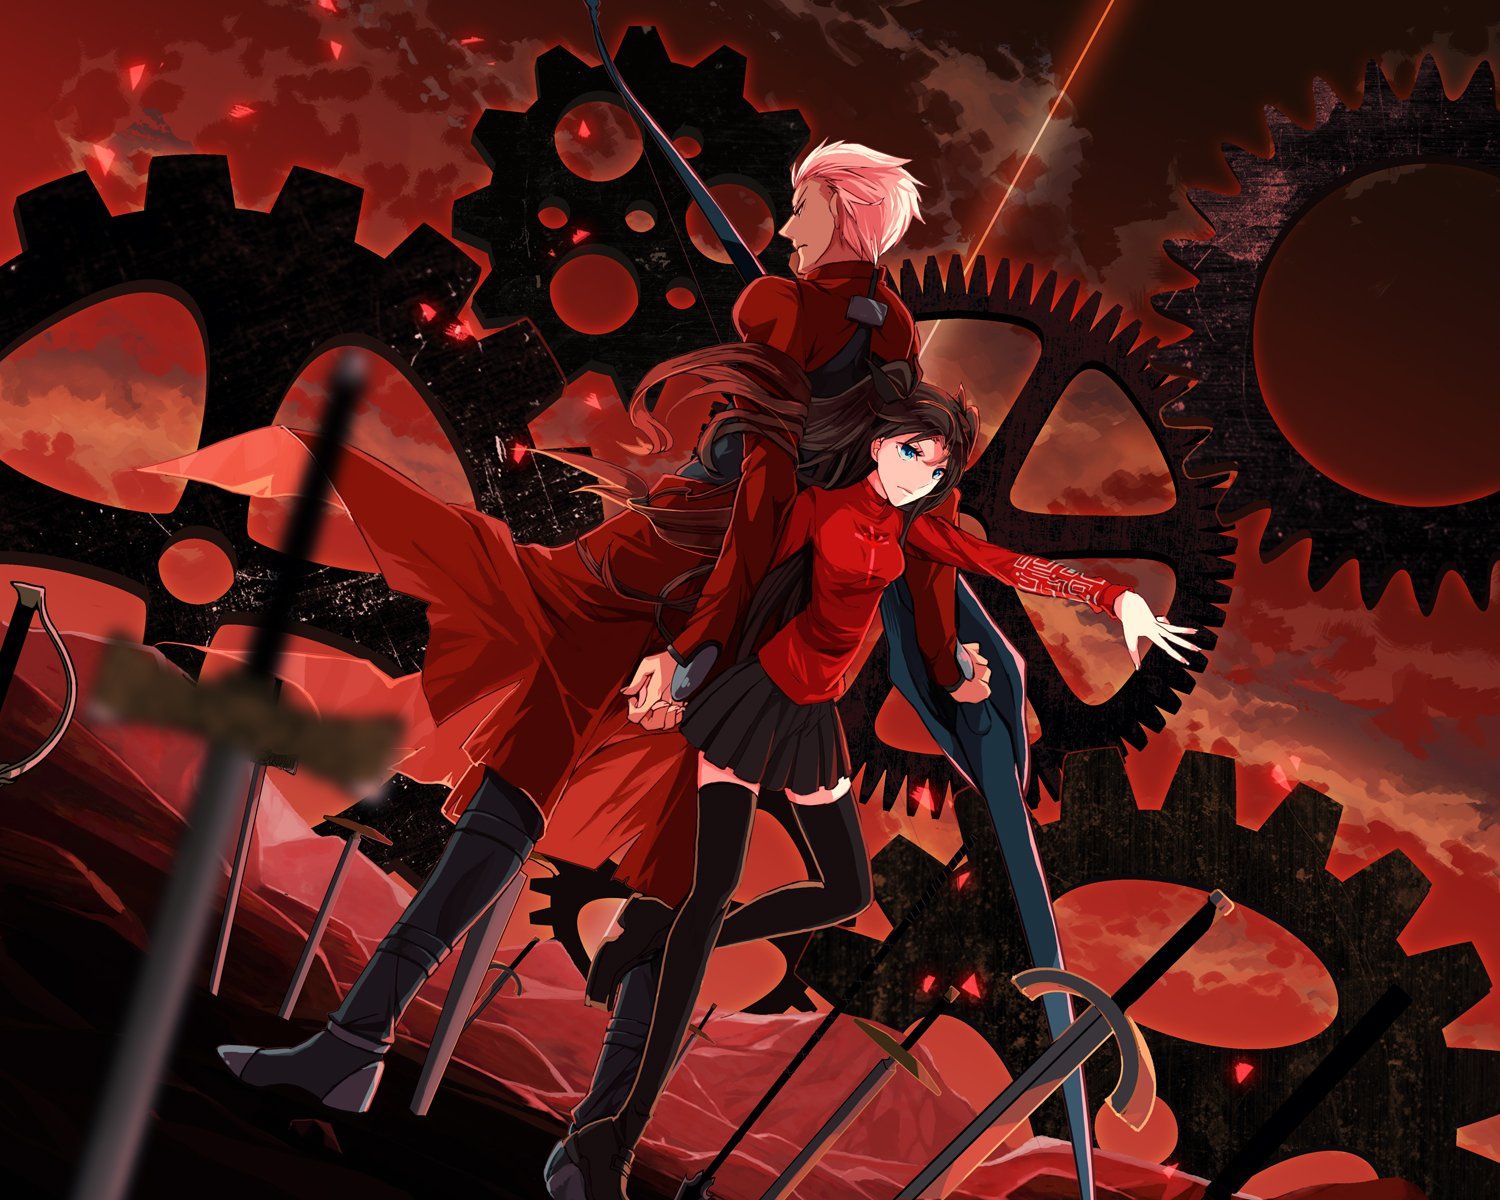 Anime series fate stay night swords red characters girl boy dress